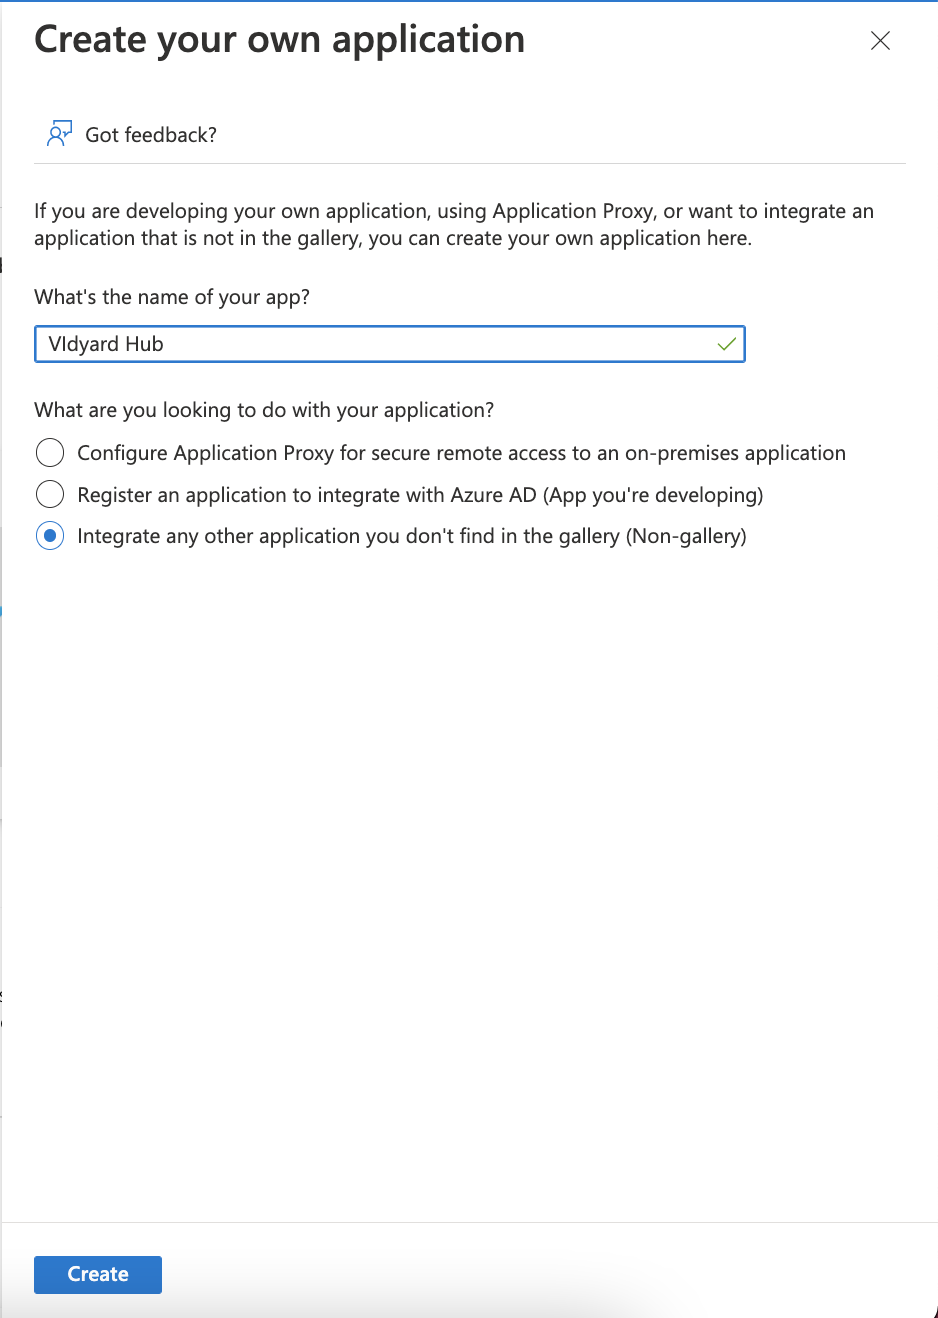 Create application menu in Azure, with Integrate any other application you don't find in the gallery (Non-gallery) option selected.